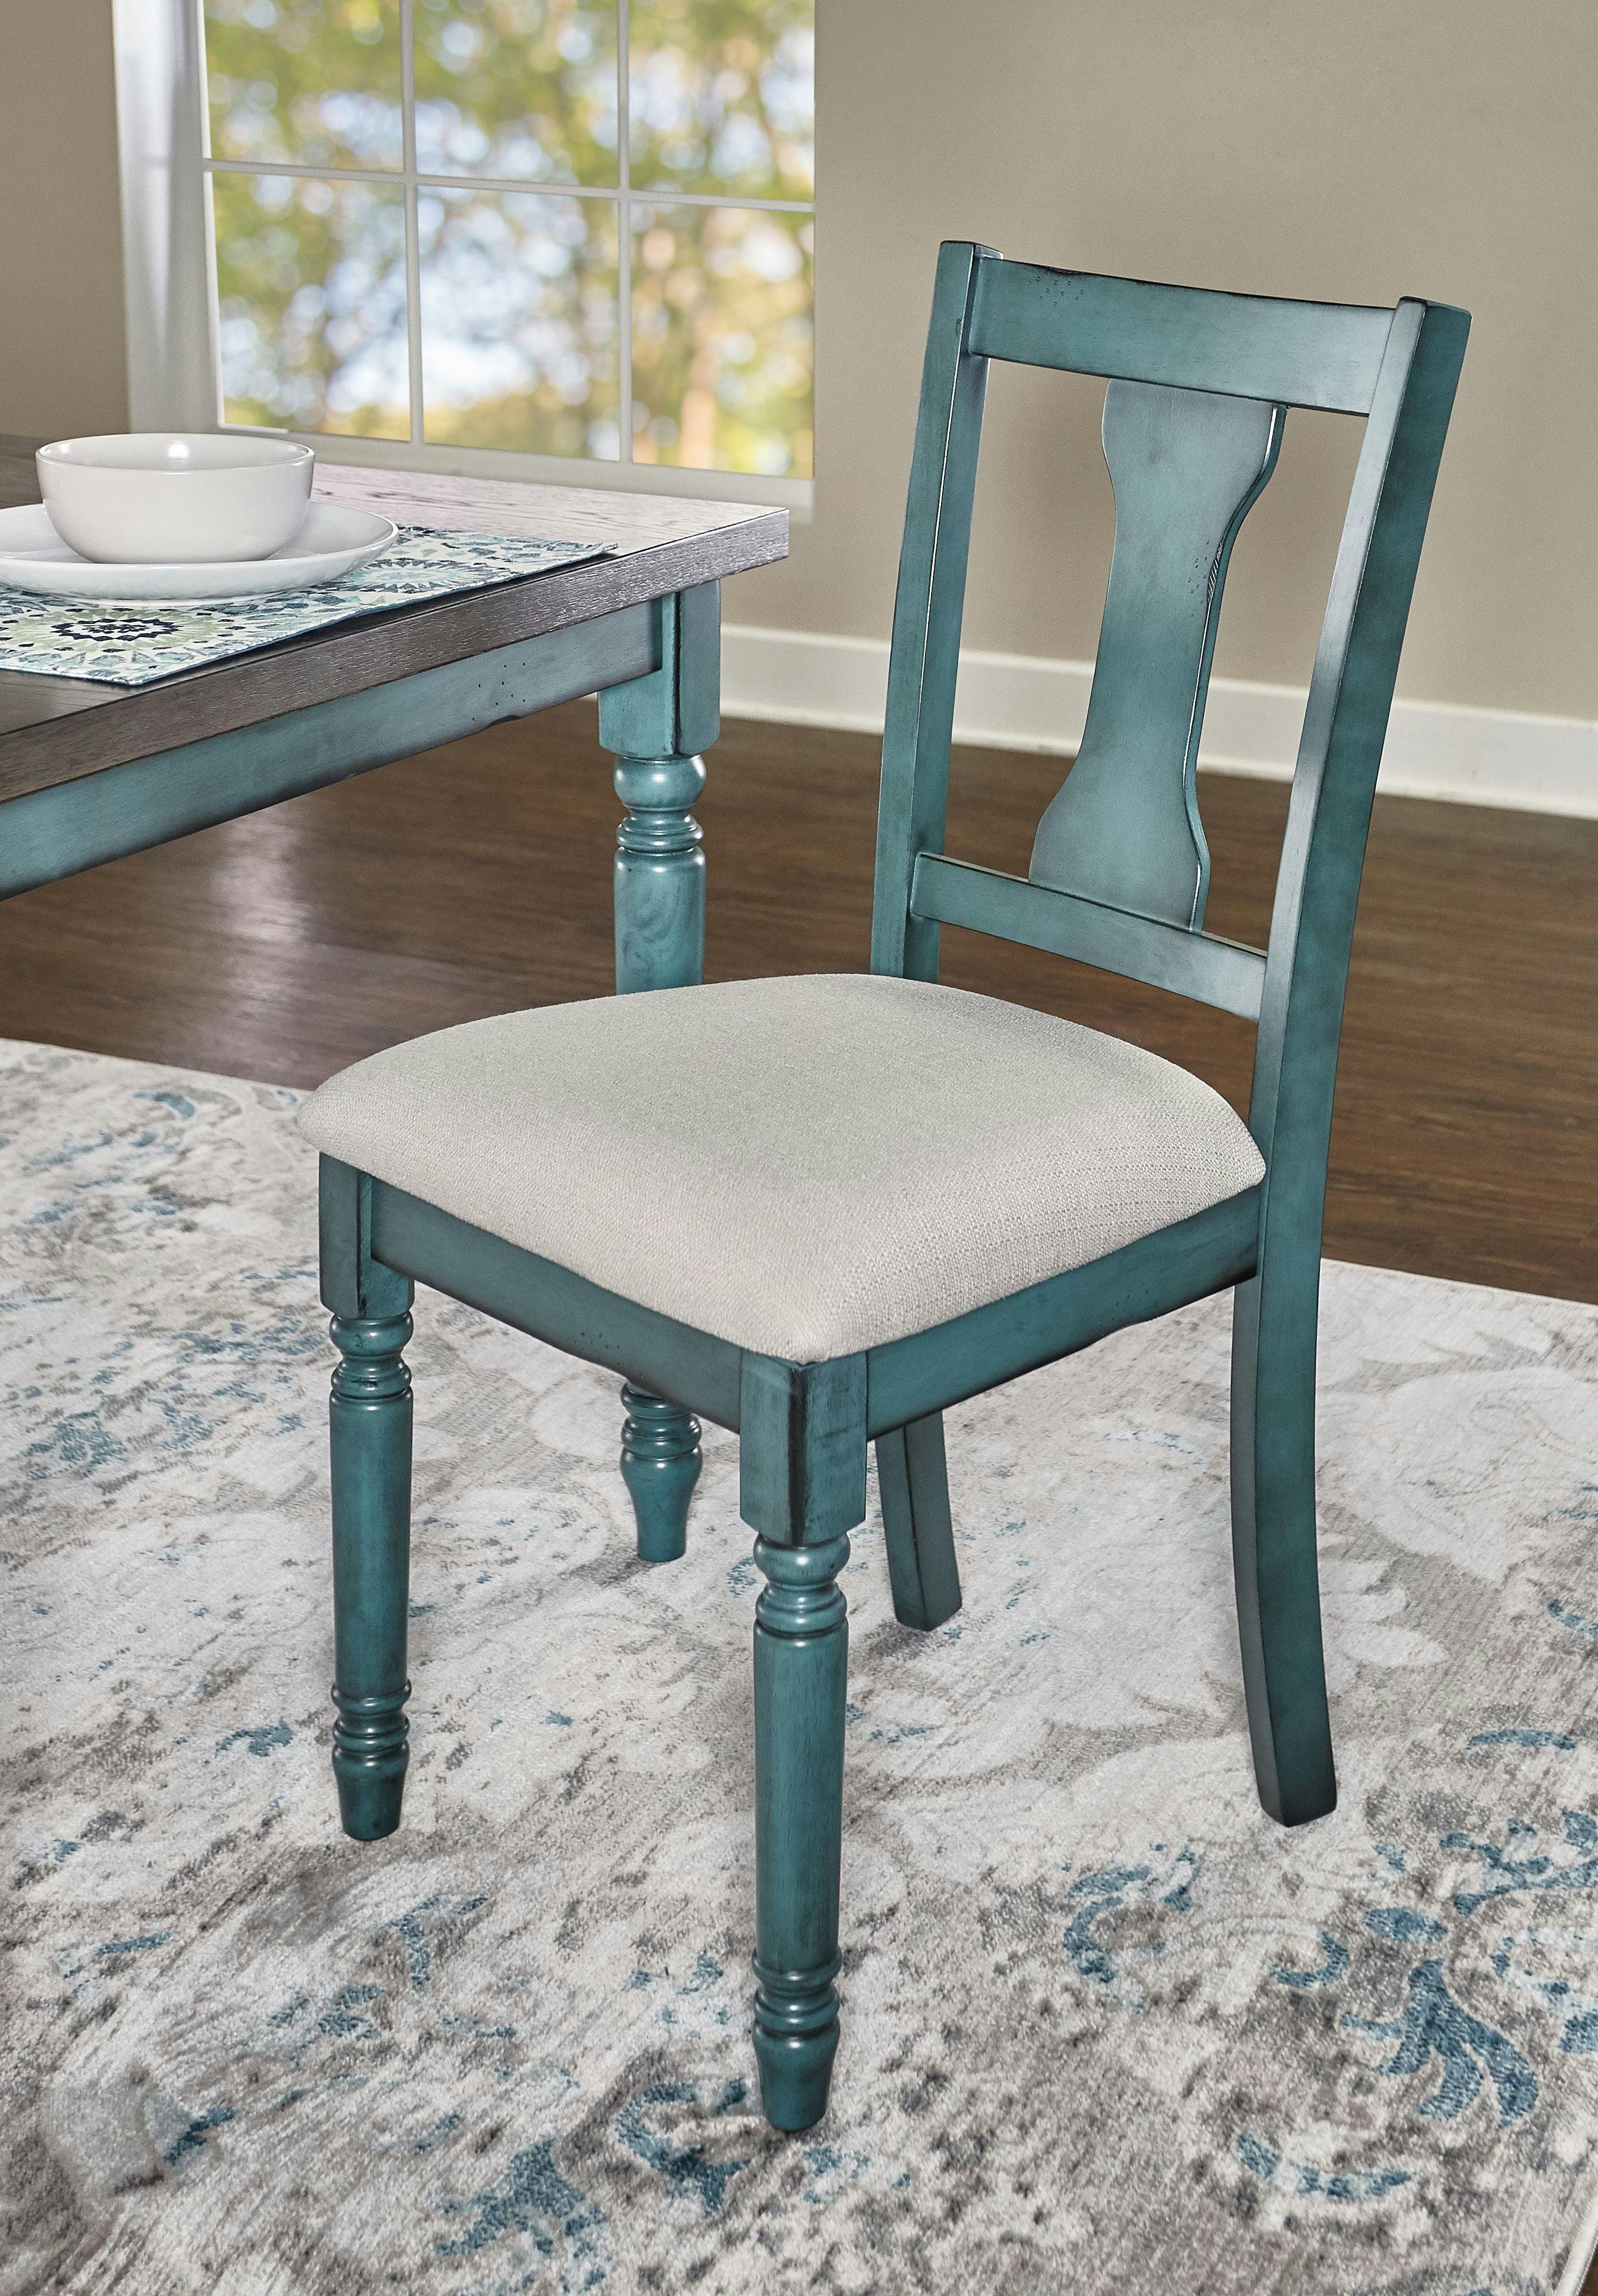 Bastion Upholstered Dining Chair